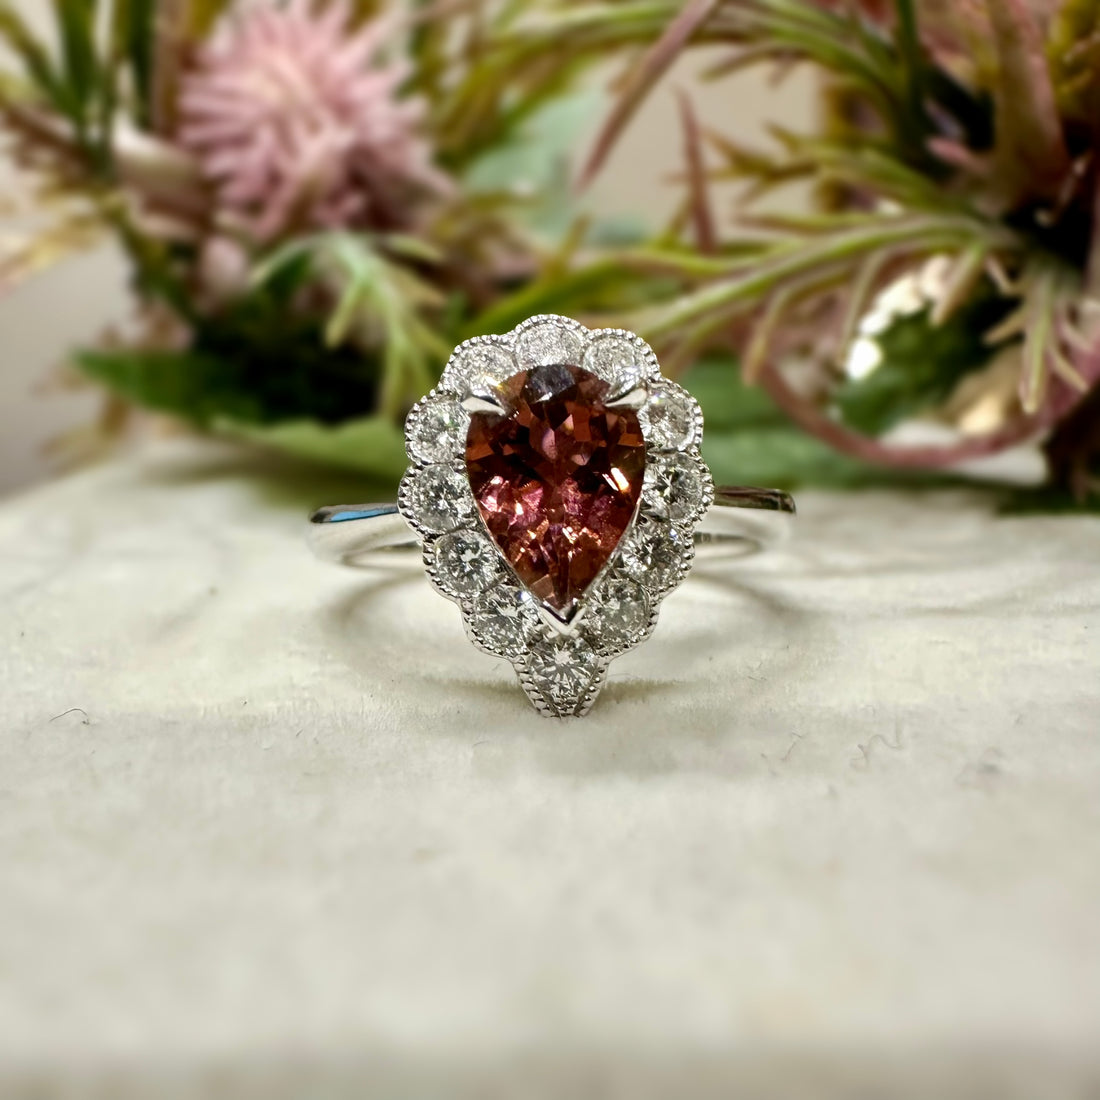 18CT White Gold Pink Pear Cut Tourmaline with Diamond Halo Ring